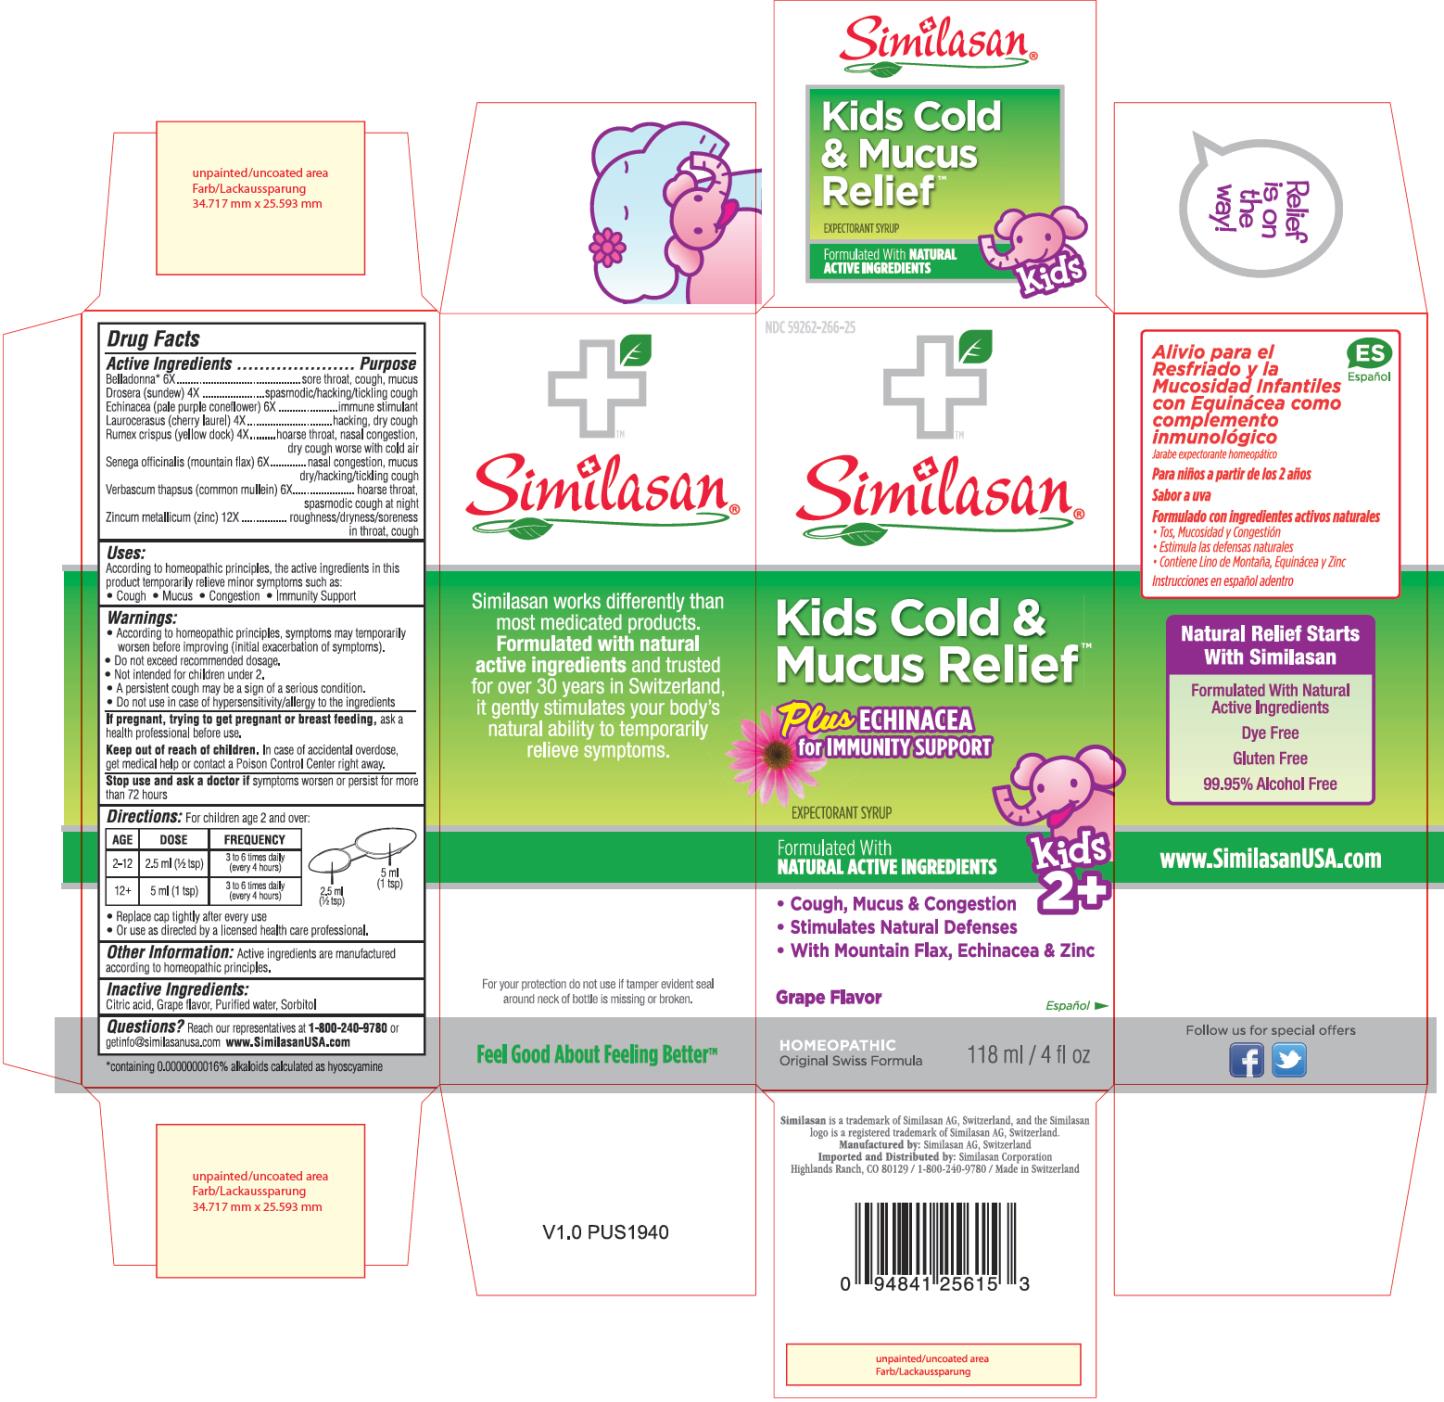 PRINCIPAL DISPLAY PANEL
NDC: <a href=/NDC/59262-266-25>59262-266-25</a>
Similasan®
Kids Cold &
Mucus Relief
Plus ECHINACEA
for IMMUNITY SUPPORT
EXPECTORANT SYRUP
118 ml / 4 fl oz
